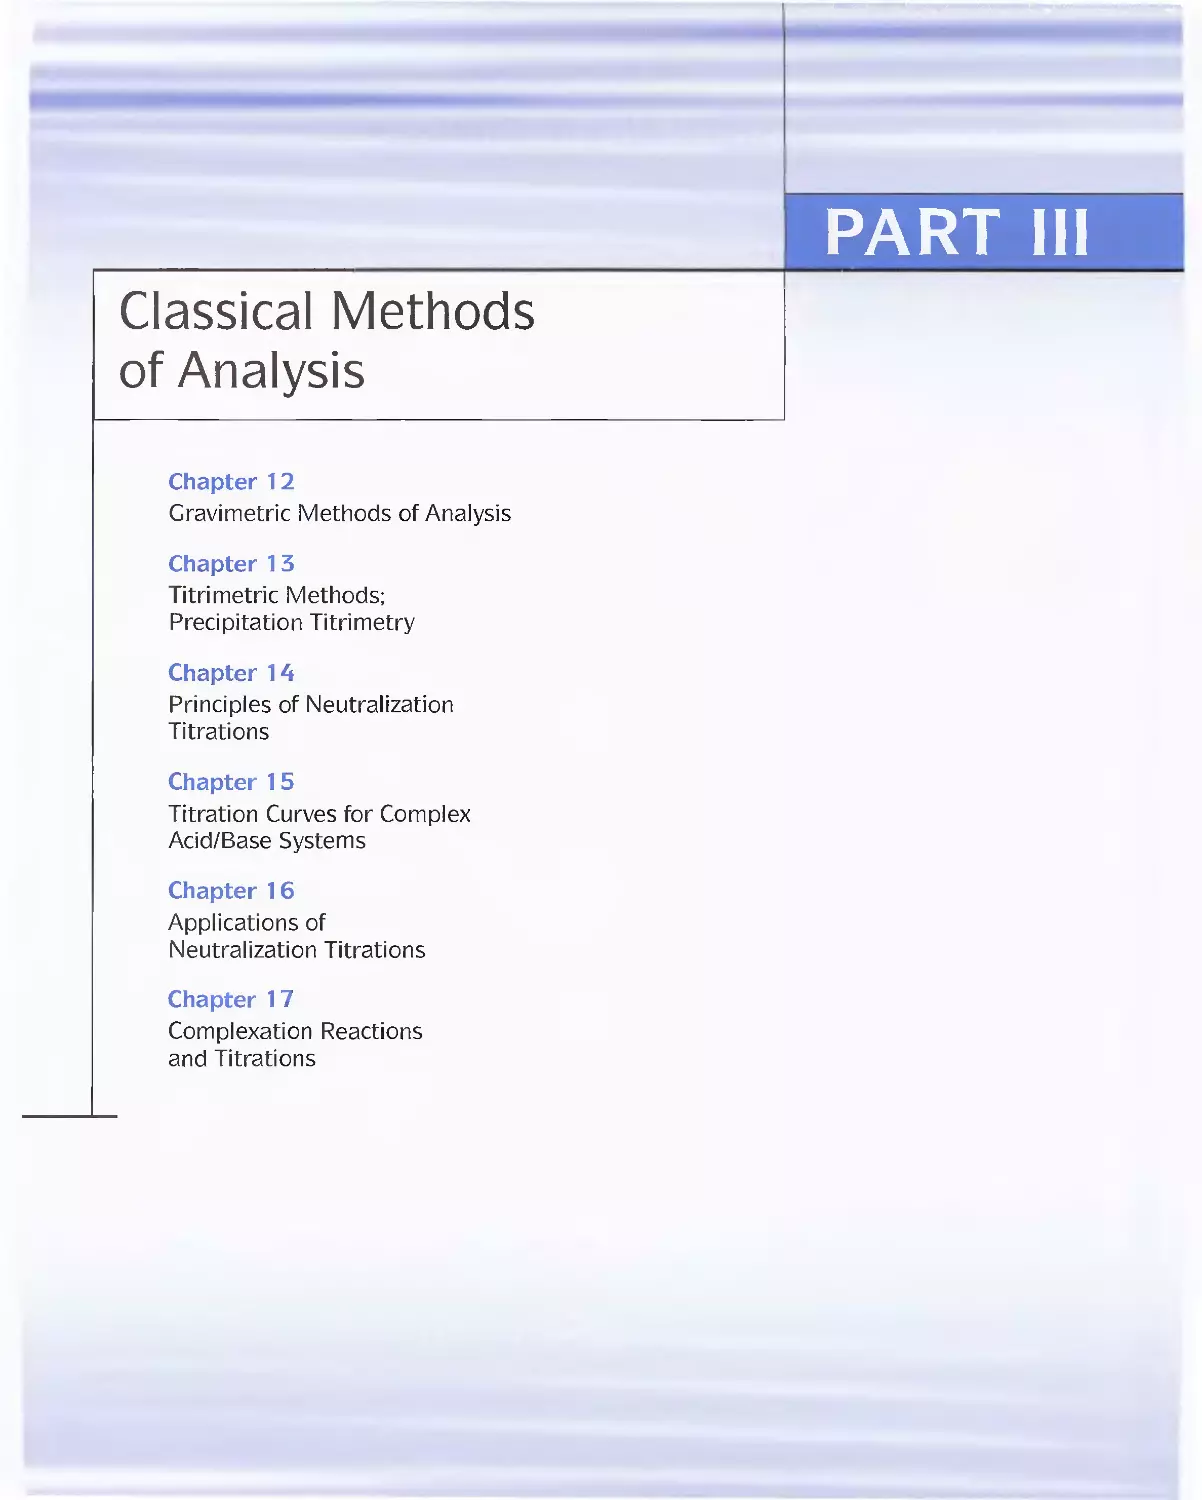 Part 3 - Classical Methods of Analysis